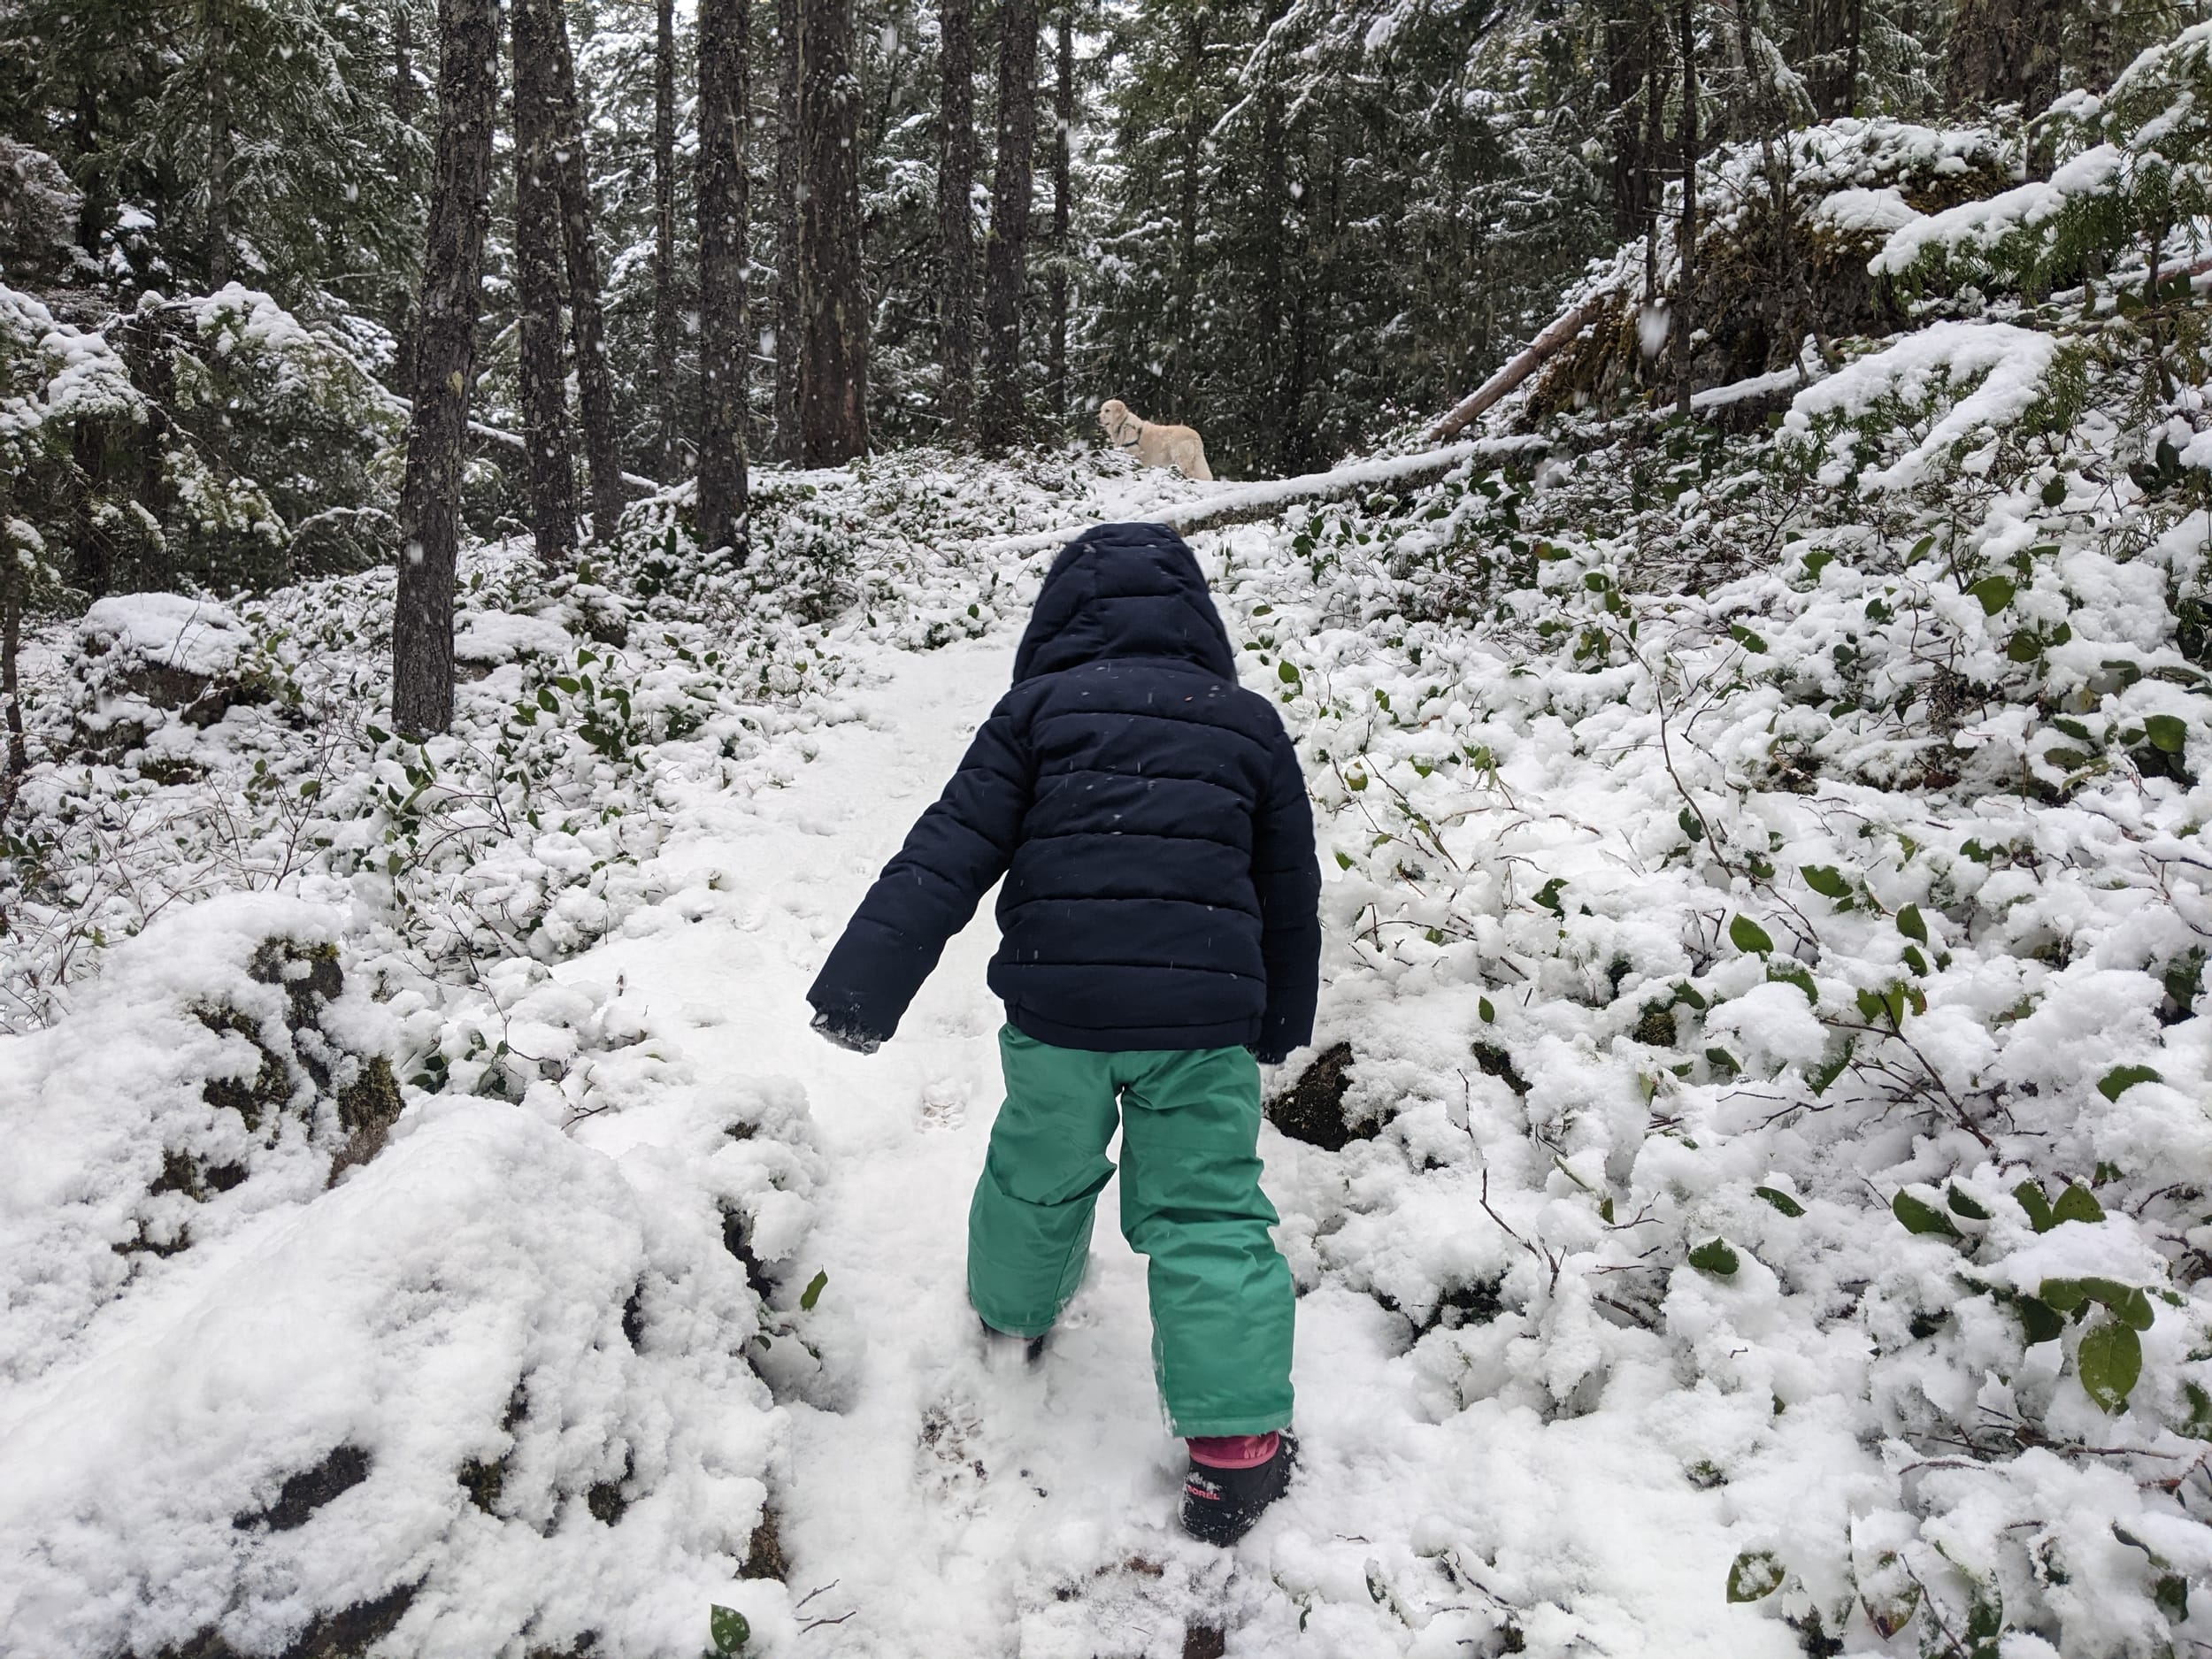 First trip to the North Cascades - snowy adventure!